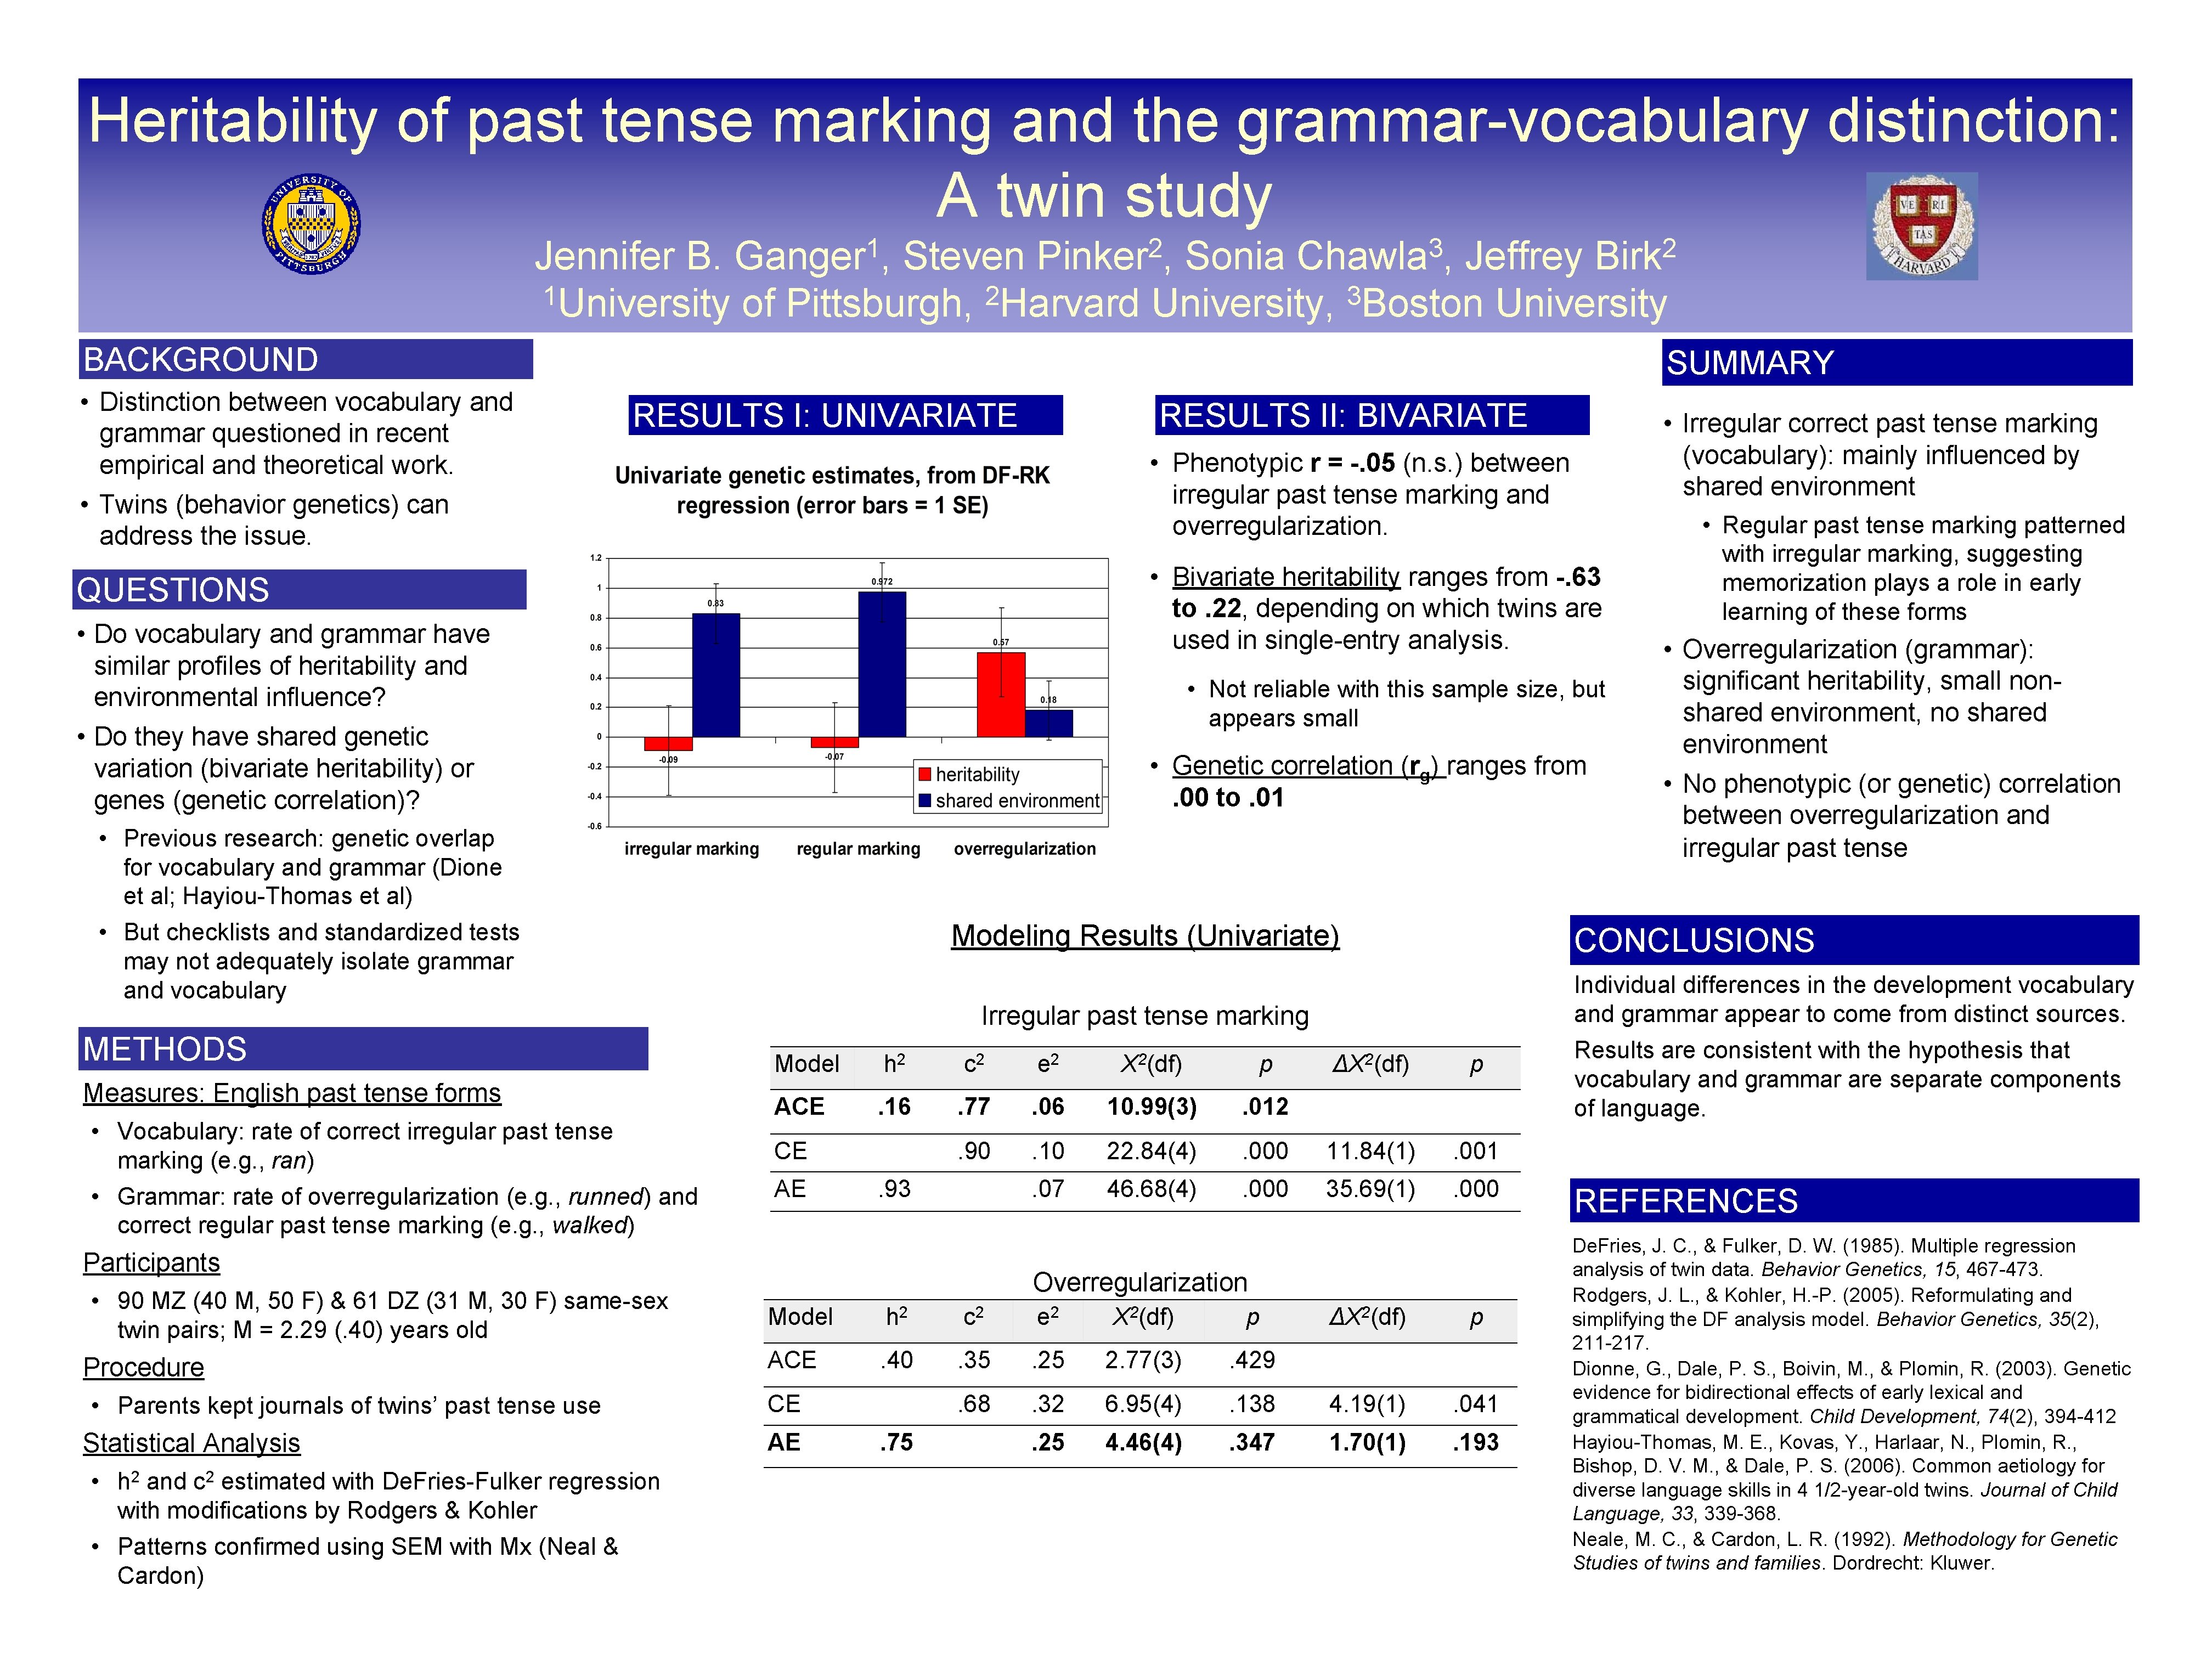 Heritability of past tense marking and the grammar-vocabulary distinction: A twin study 1 Ganger